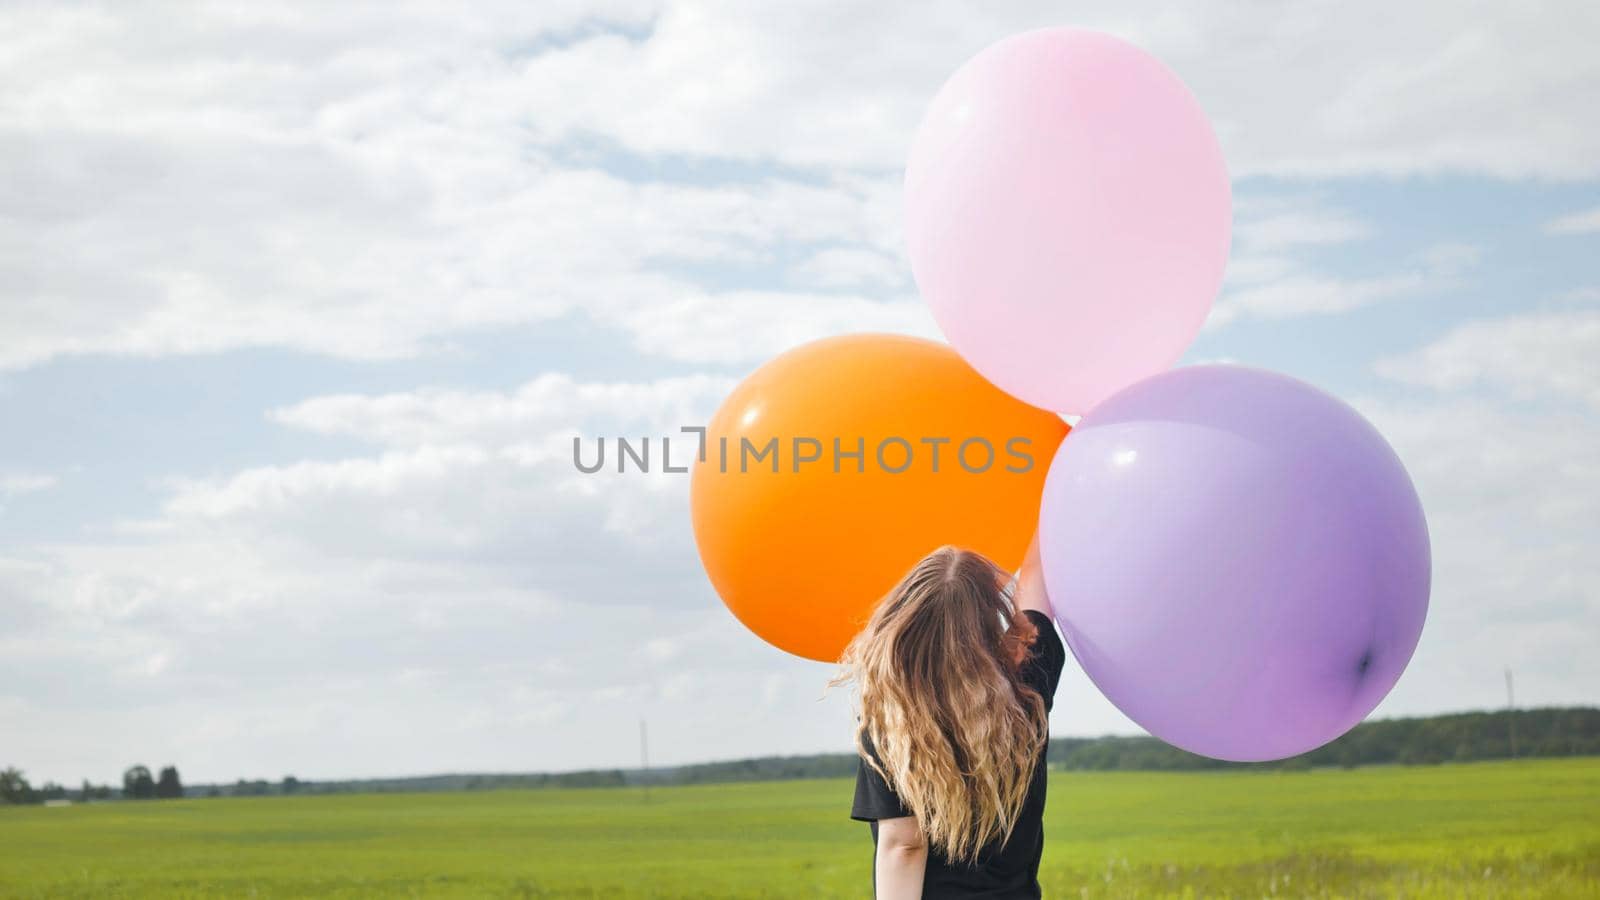 Happy girl with big multicolored balloons posing on the field